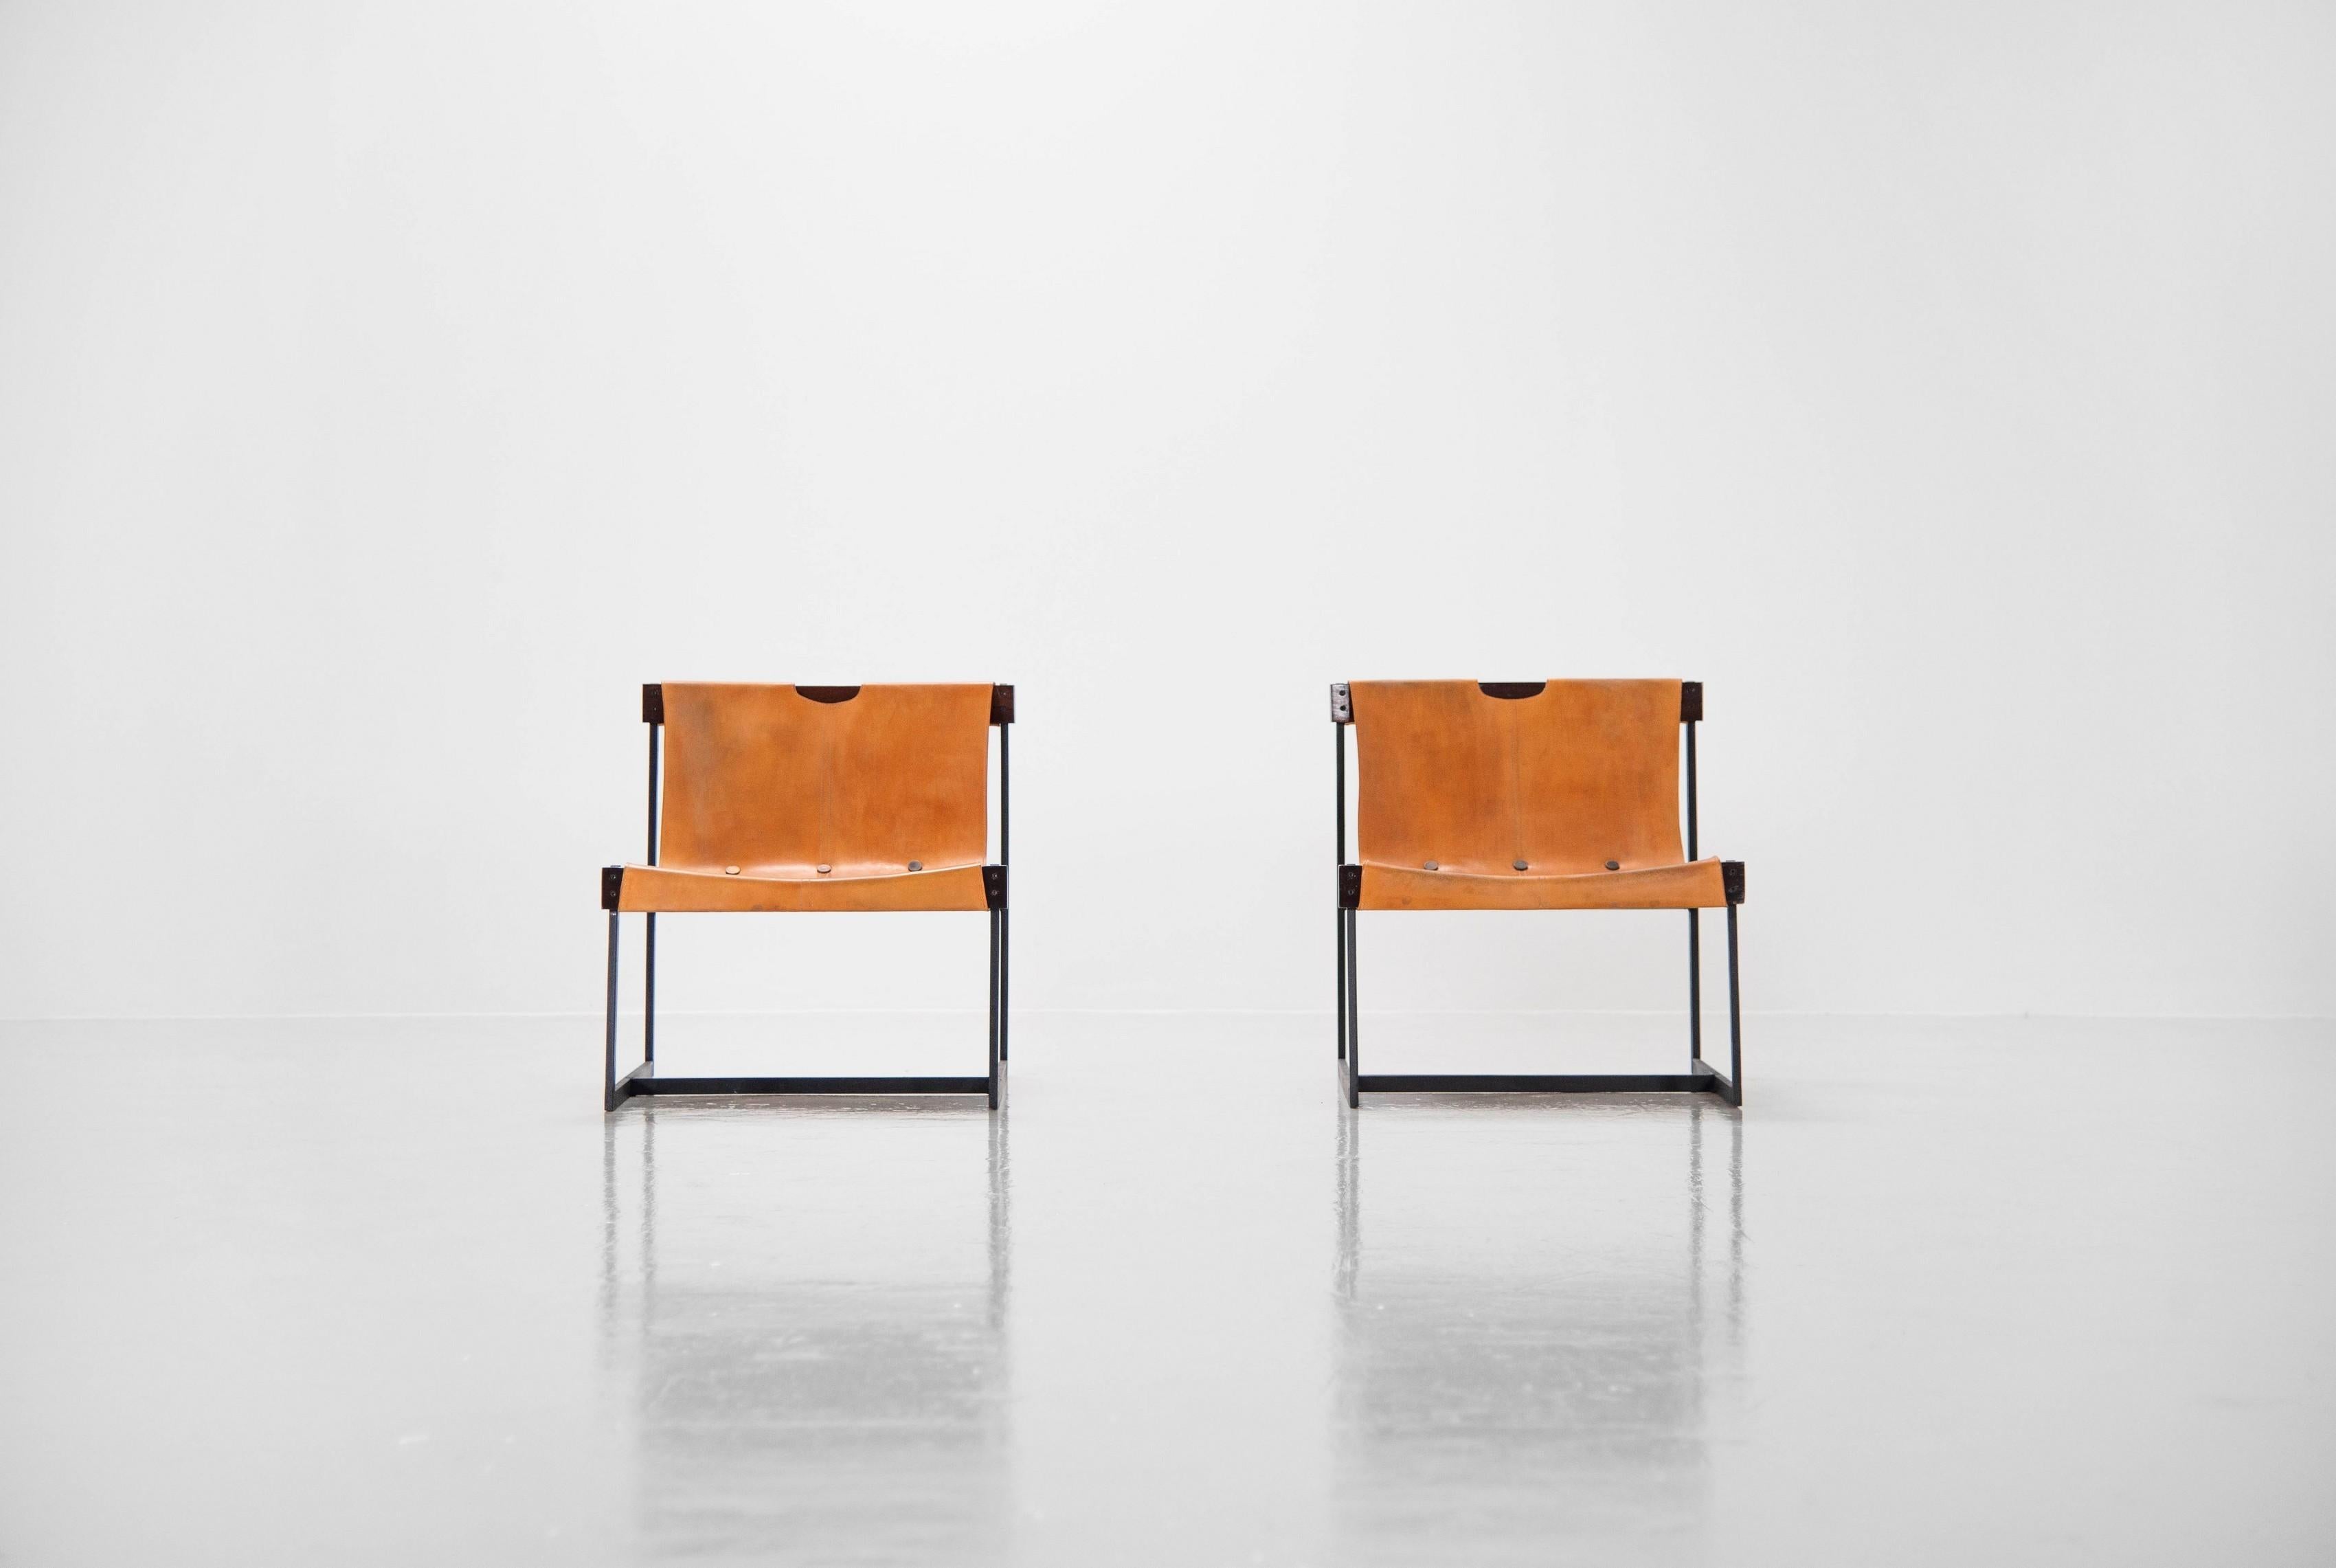 Highly beautiful and rare pair of sling chairs designed by Julio Roberto Katinsky, locally made in Brazil 1959. In 1959, to serve a private order from a client, he designed the famous Katinsky armchair, a precious example of modern furniture design